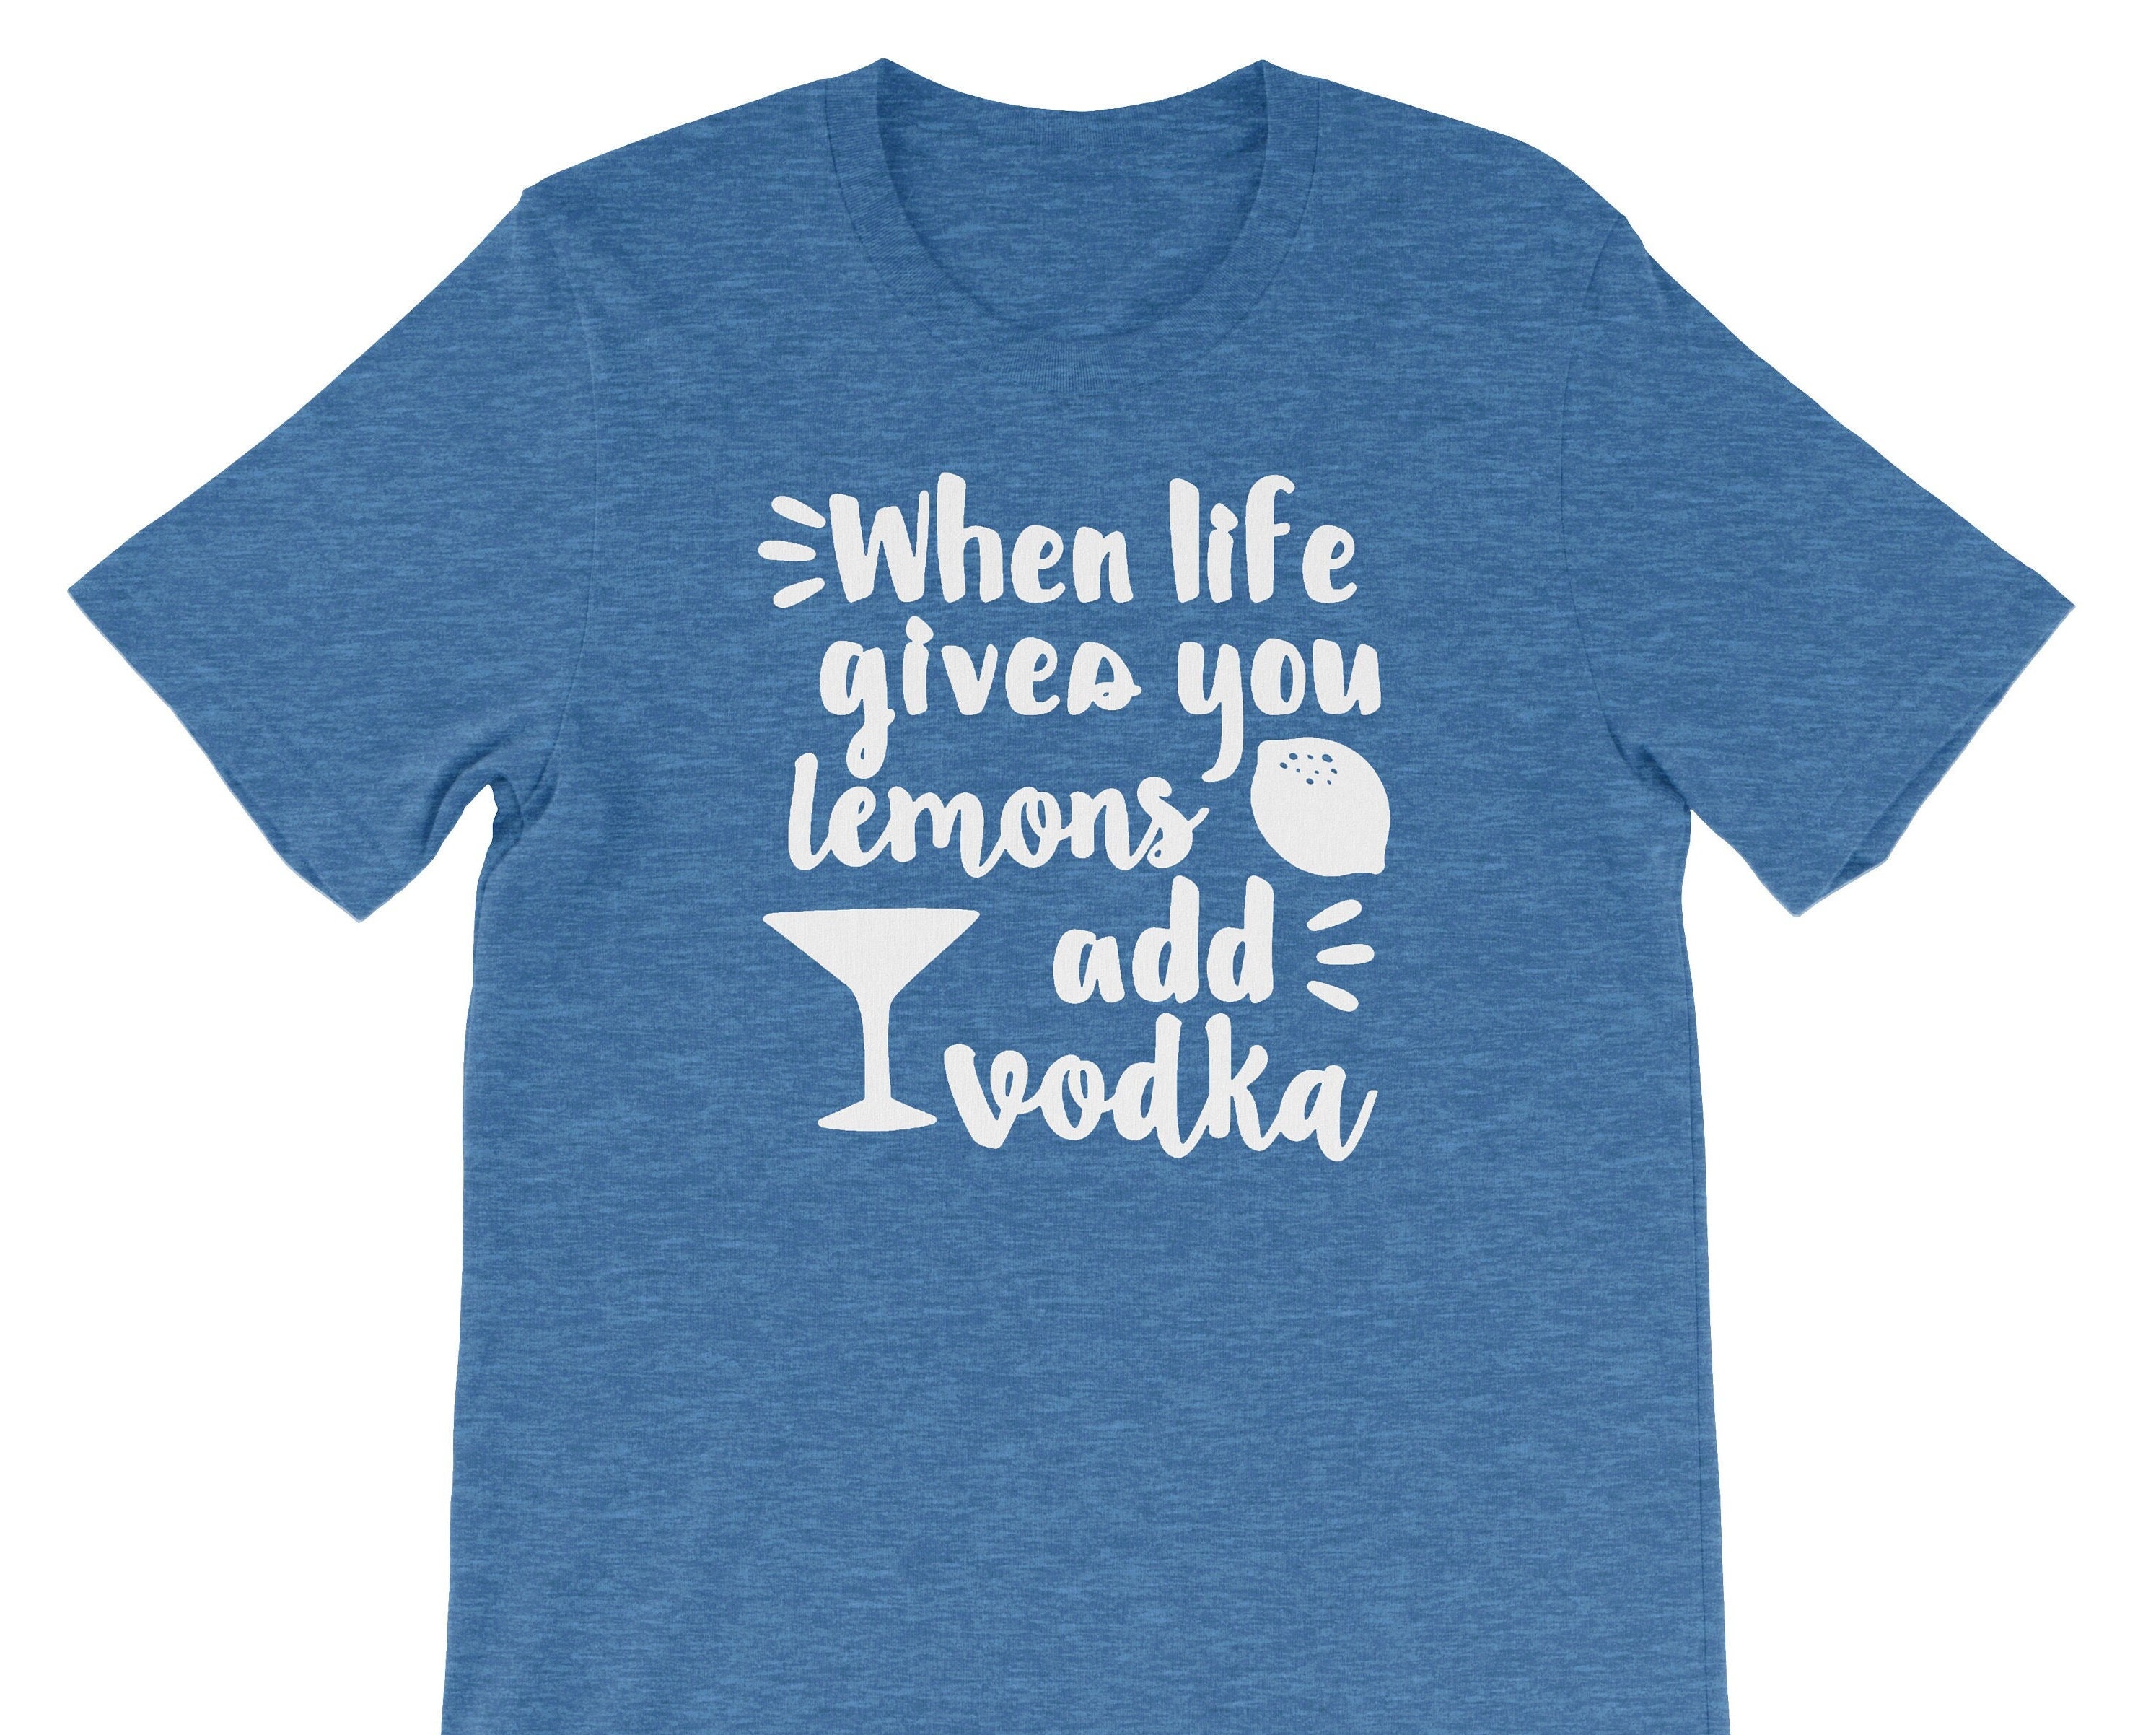 When Life Gives You Lemons Grab The Vodka And Call The Girls Glass Cup